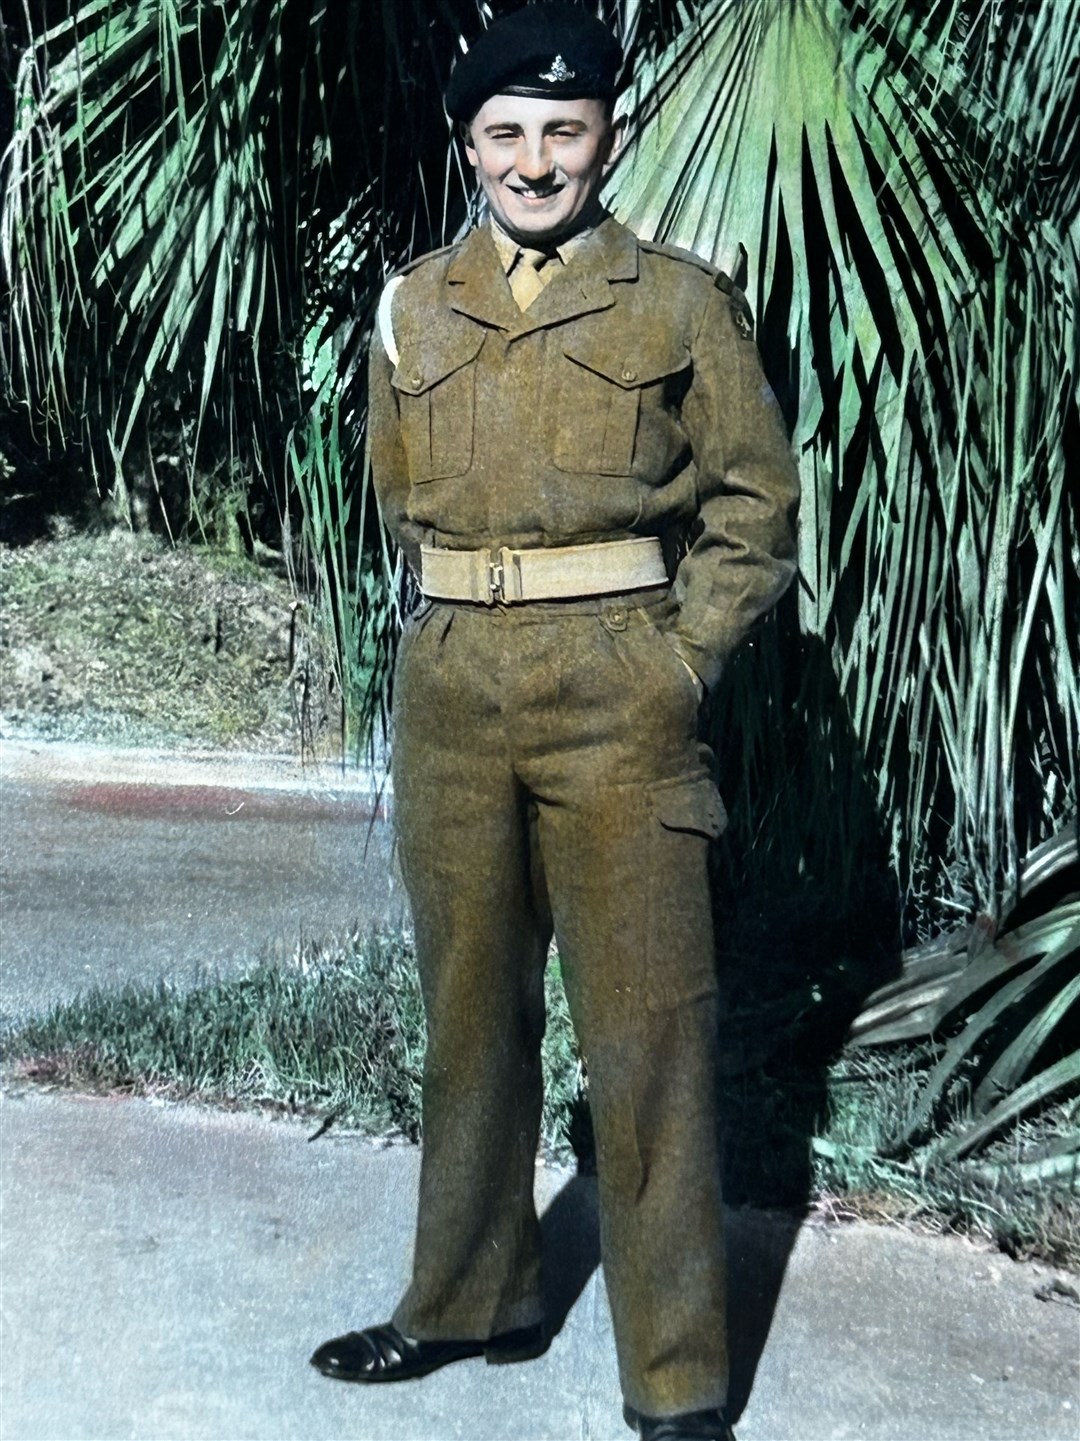 Ian doing national service in the Army